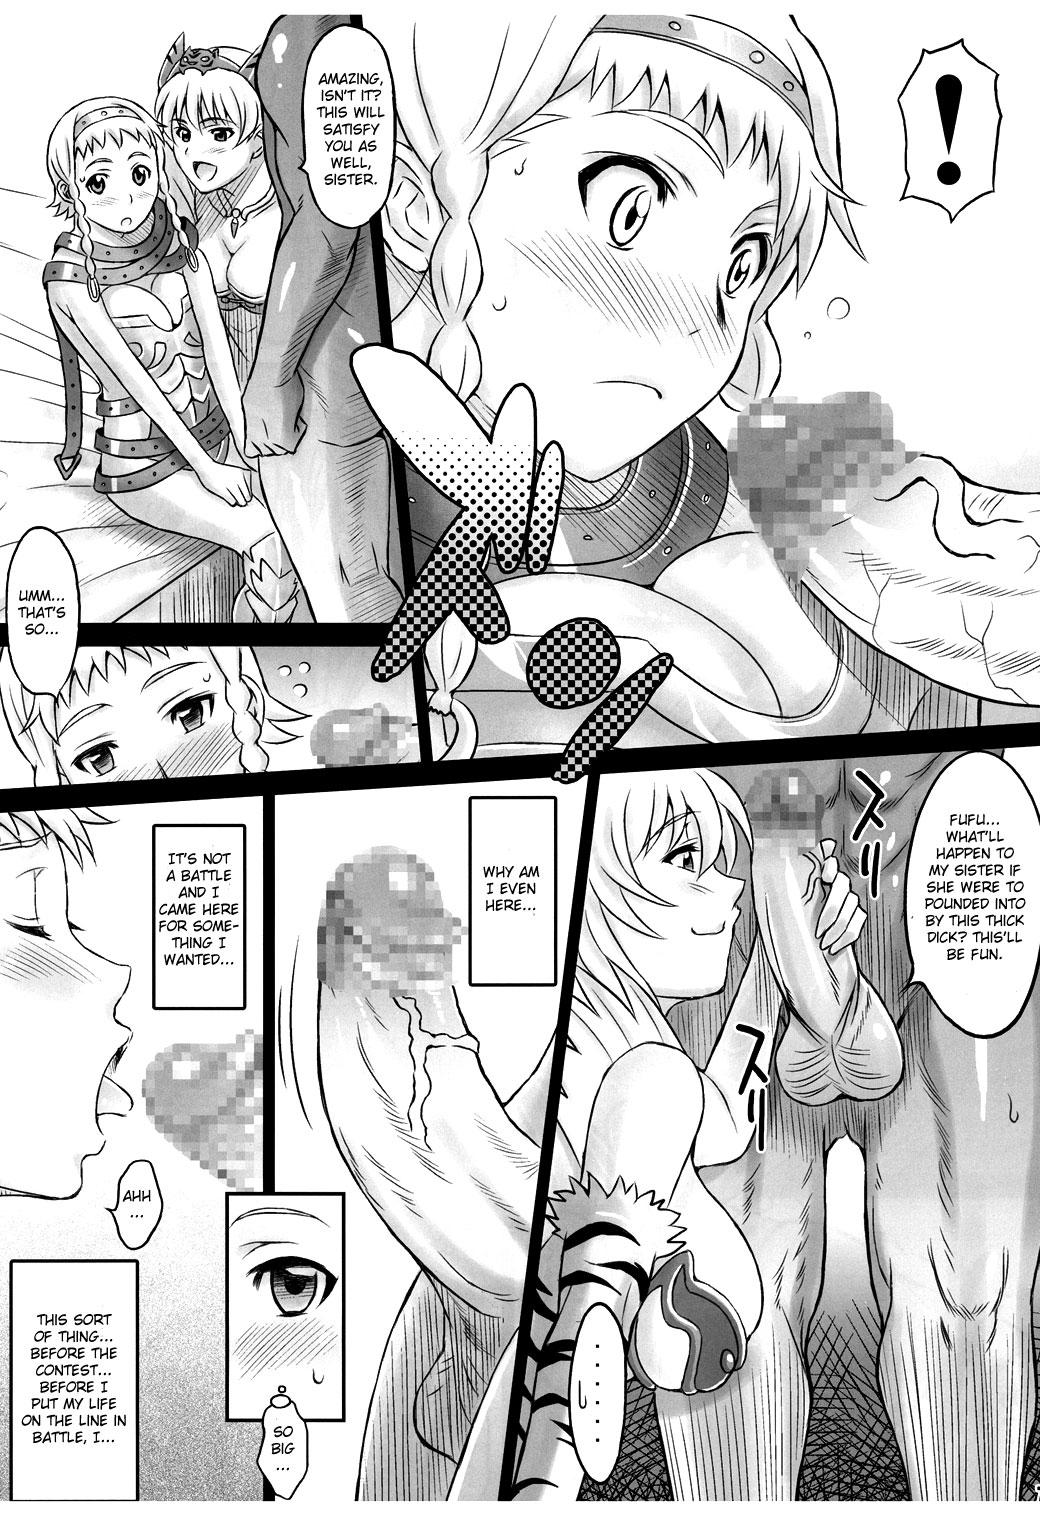 Submissive Sisters Break - Queens blade Free Hardcore - Page 6